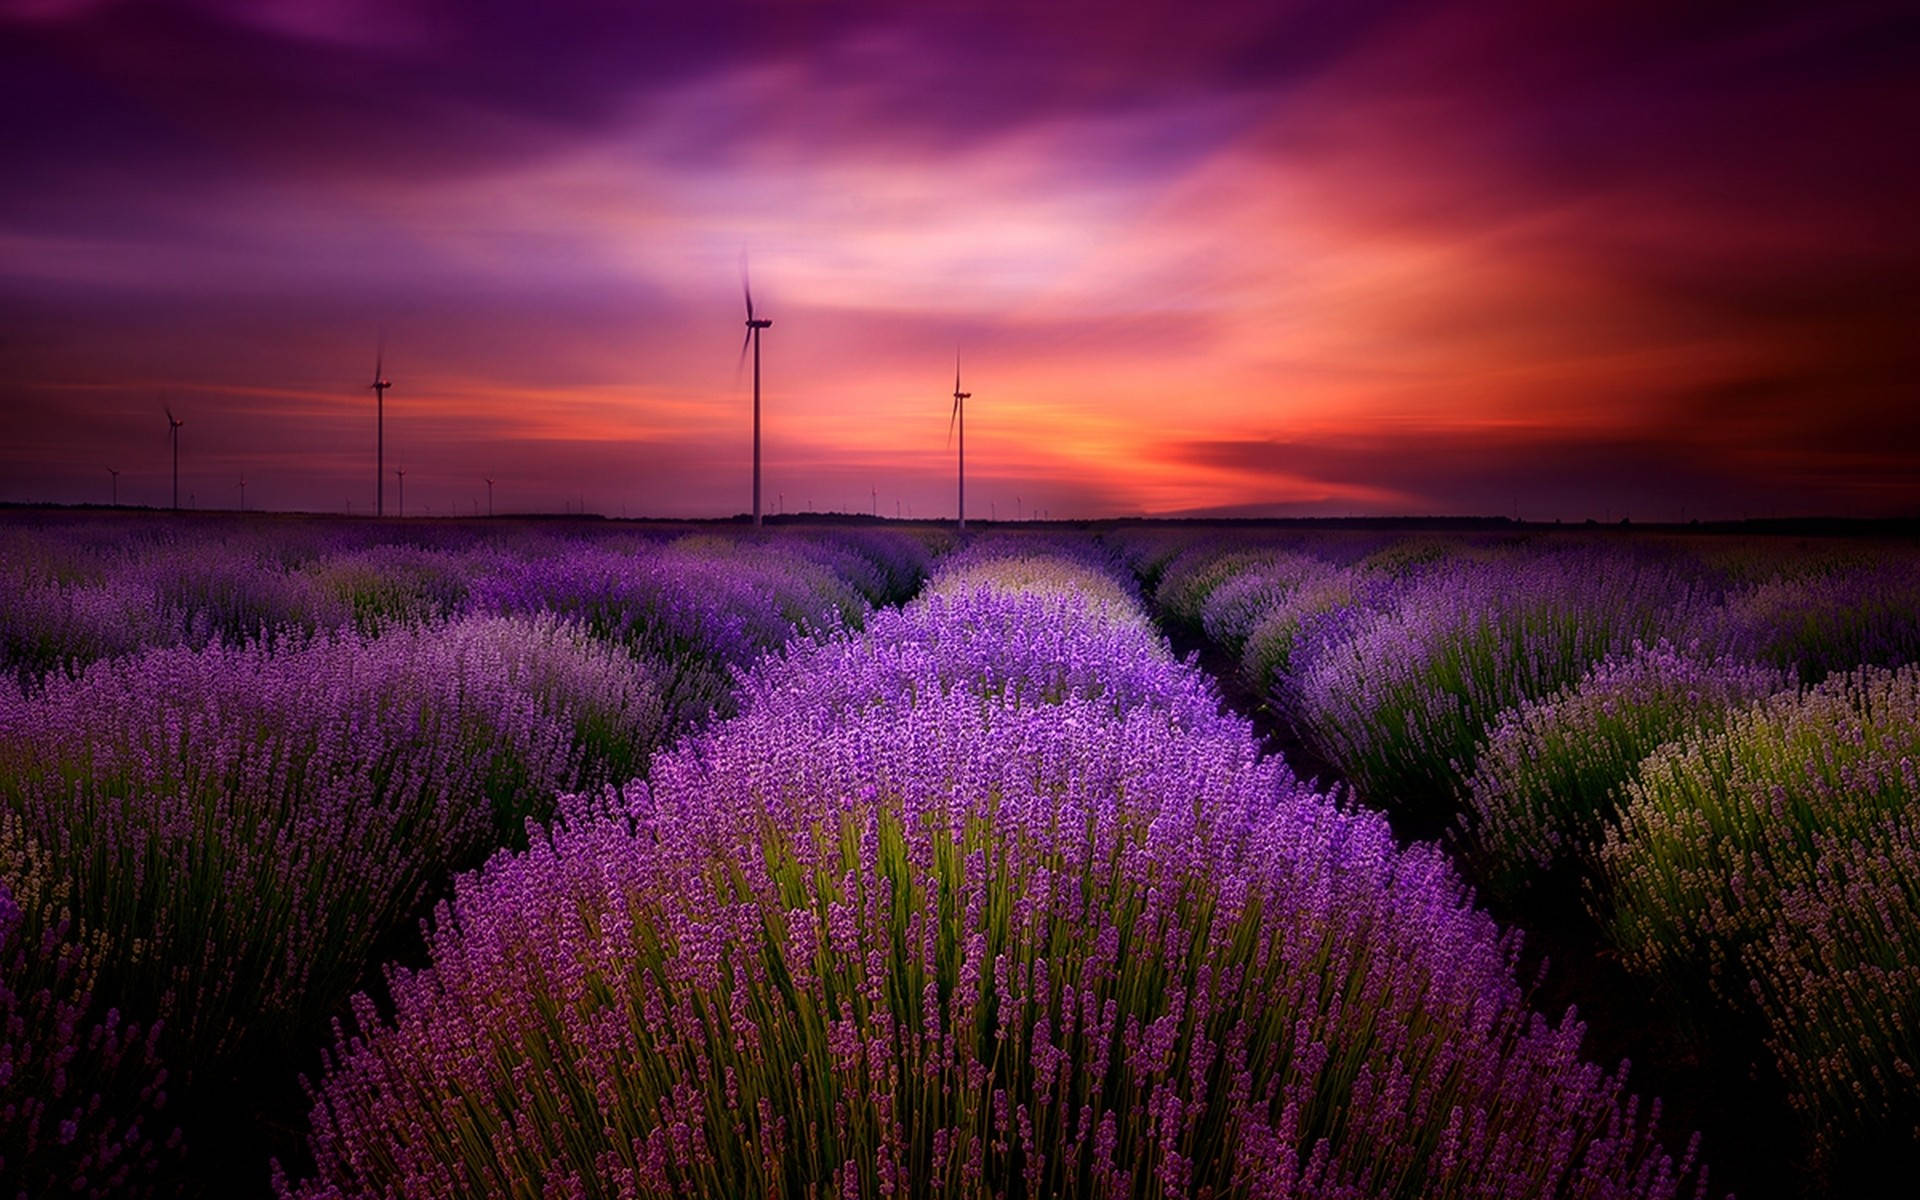 Lavender Aesthetic Field And Windmills